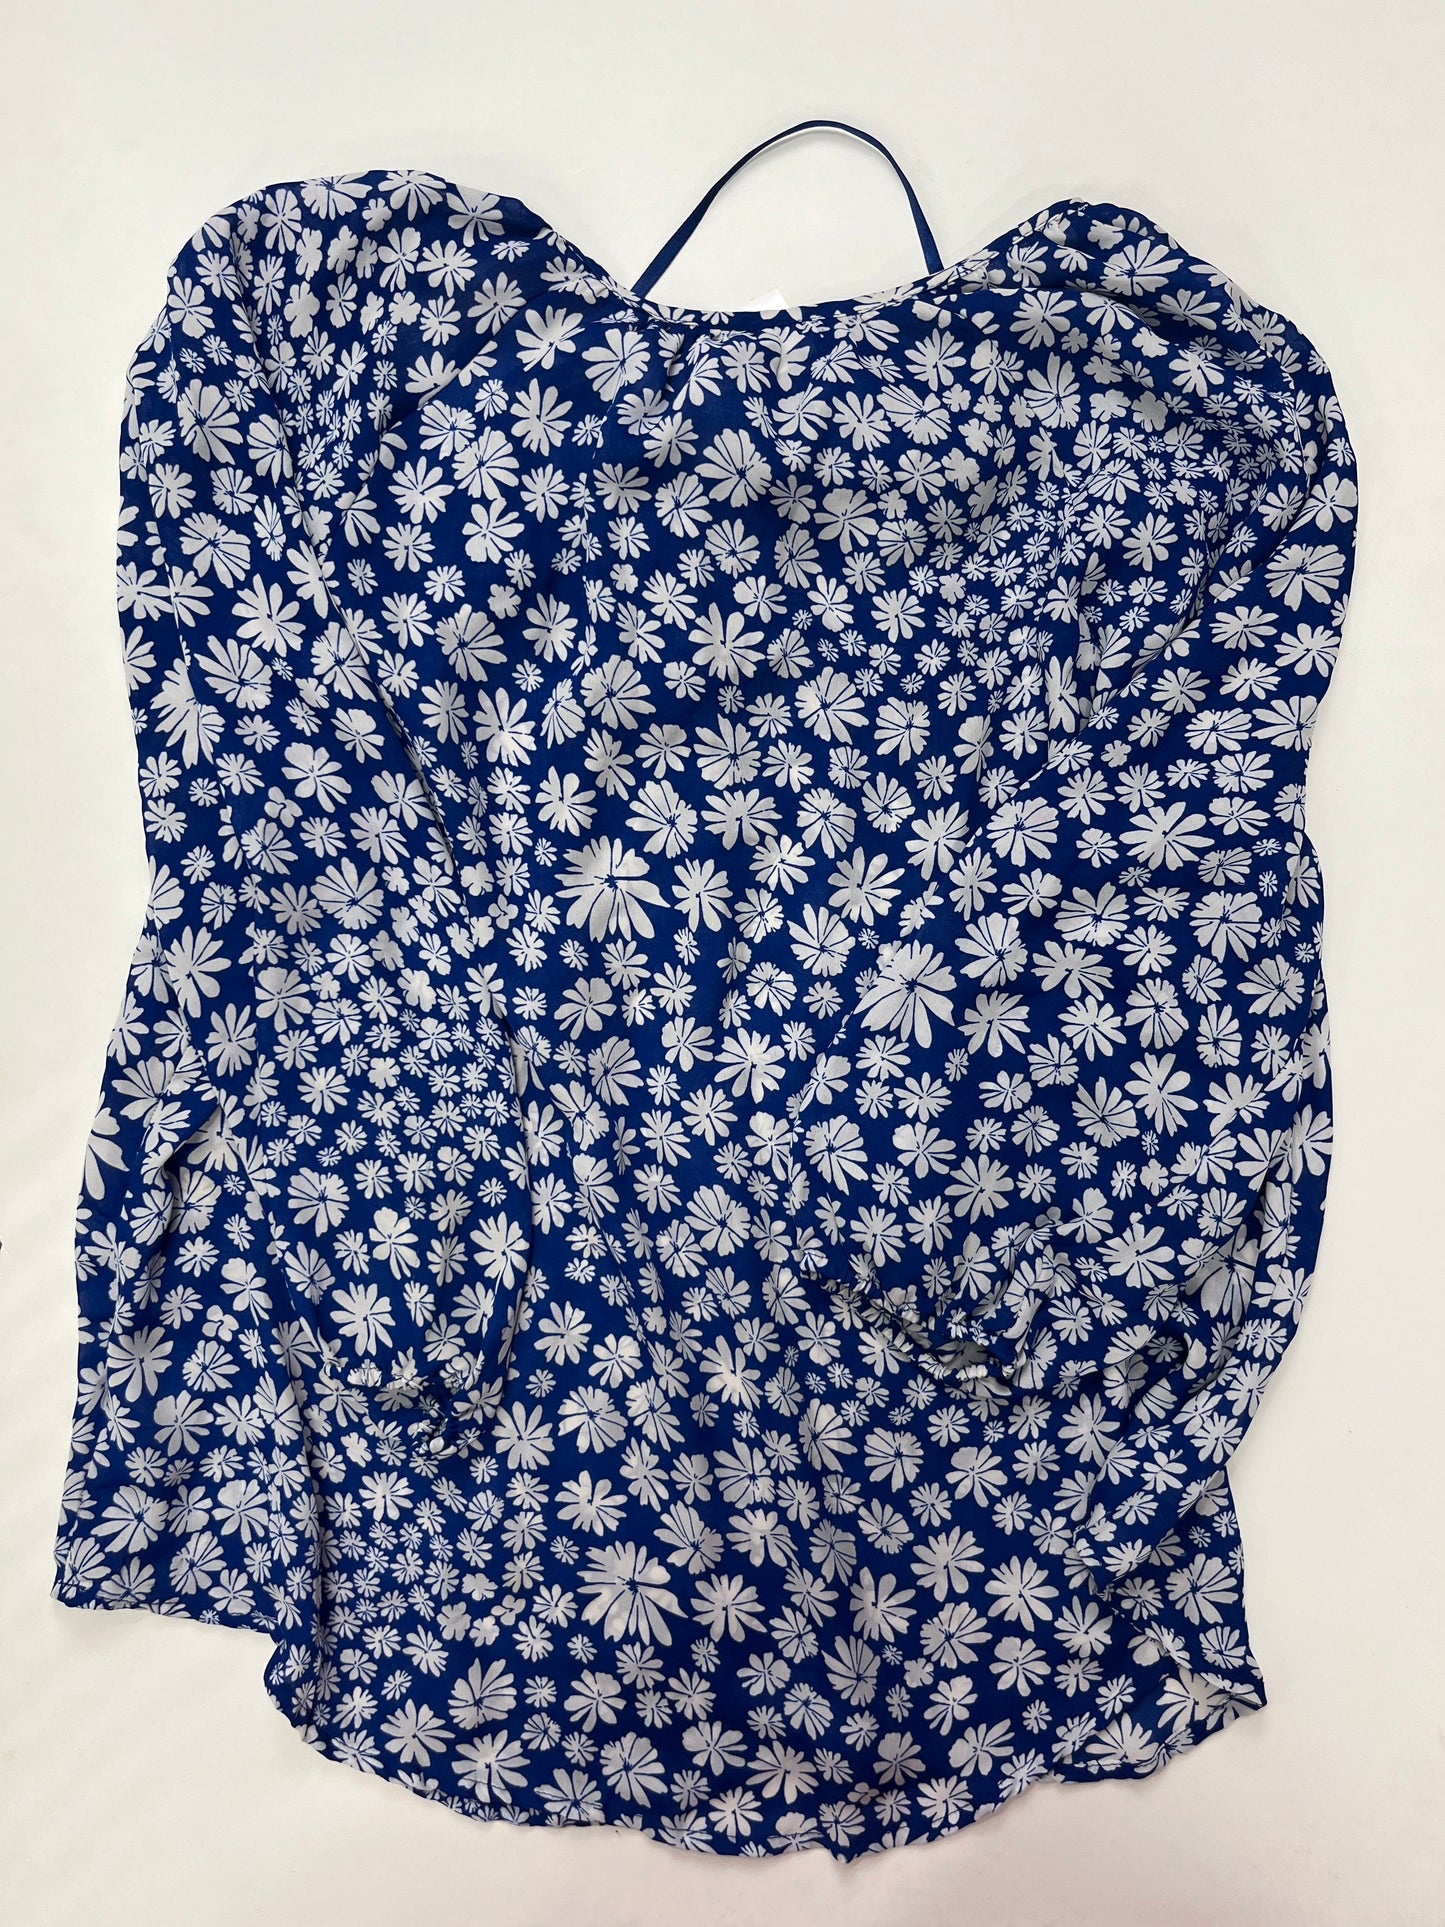 Floral Blouse Long Sleeve Charter Club O, Size 1x